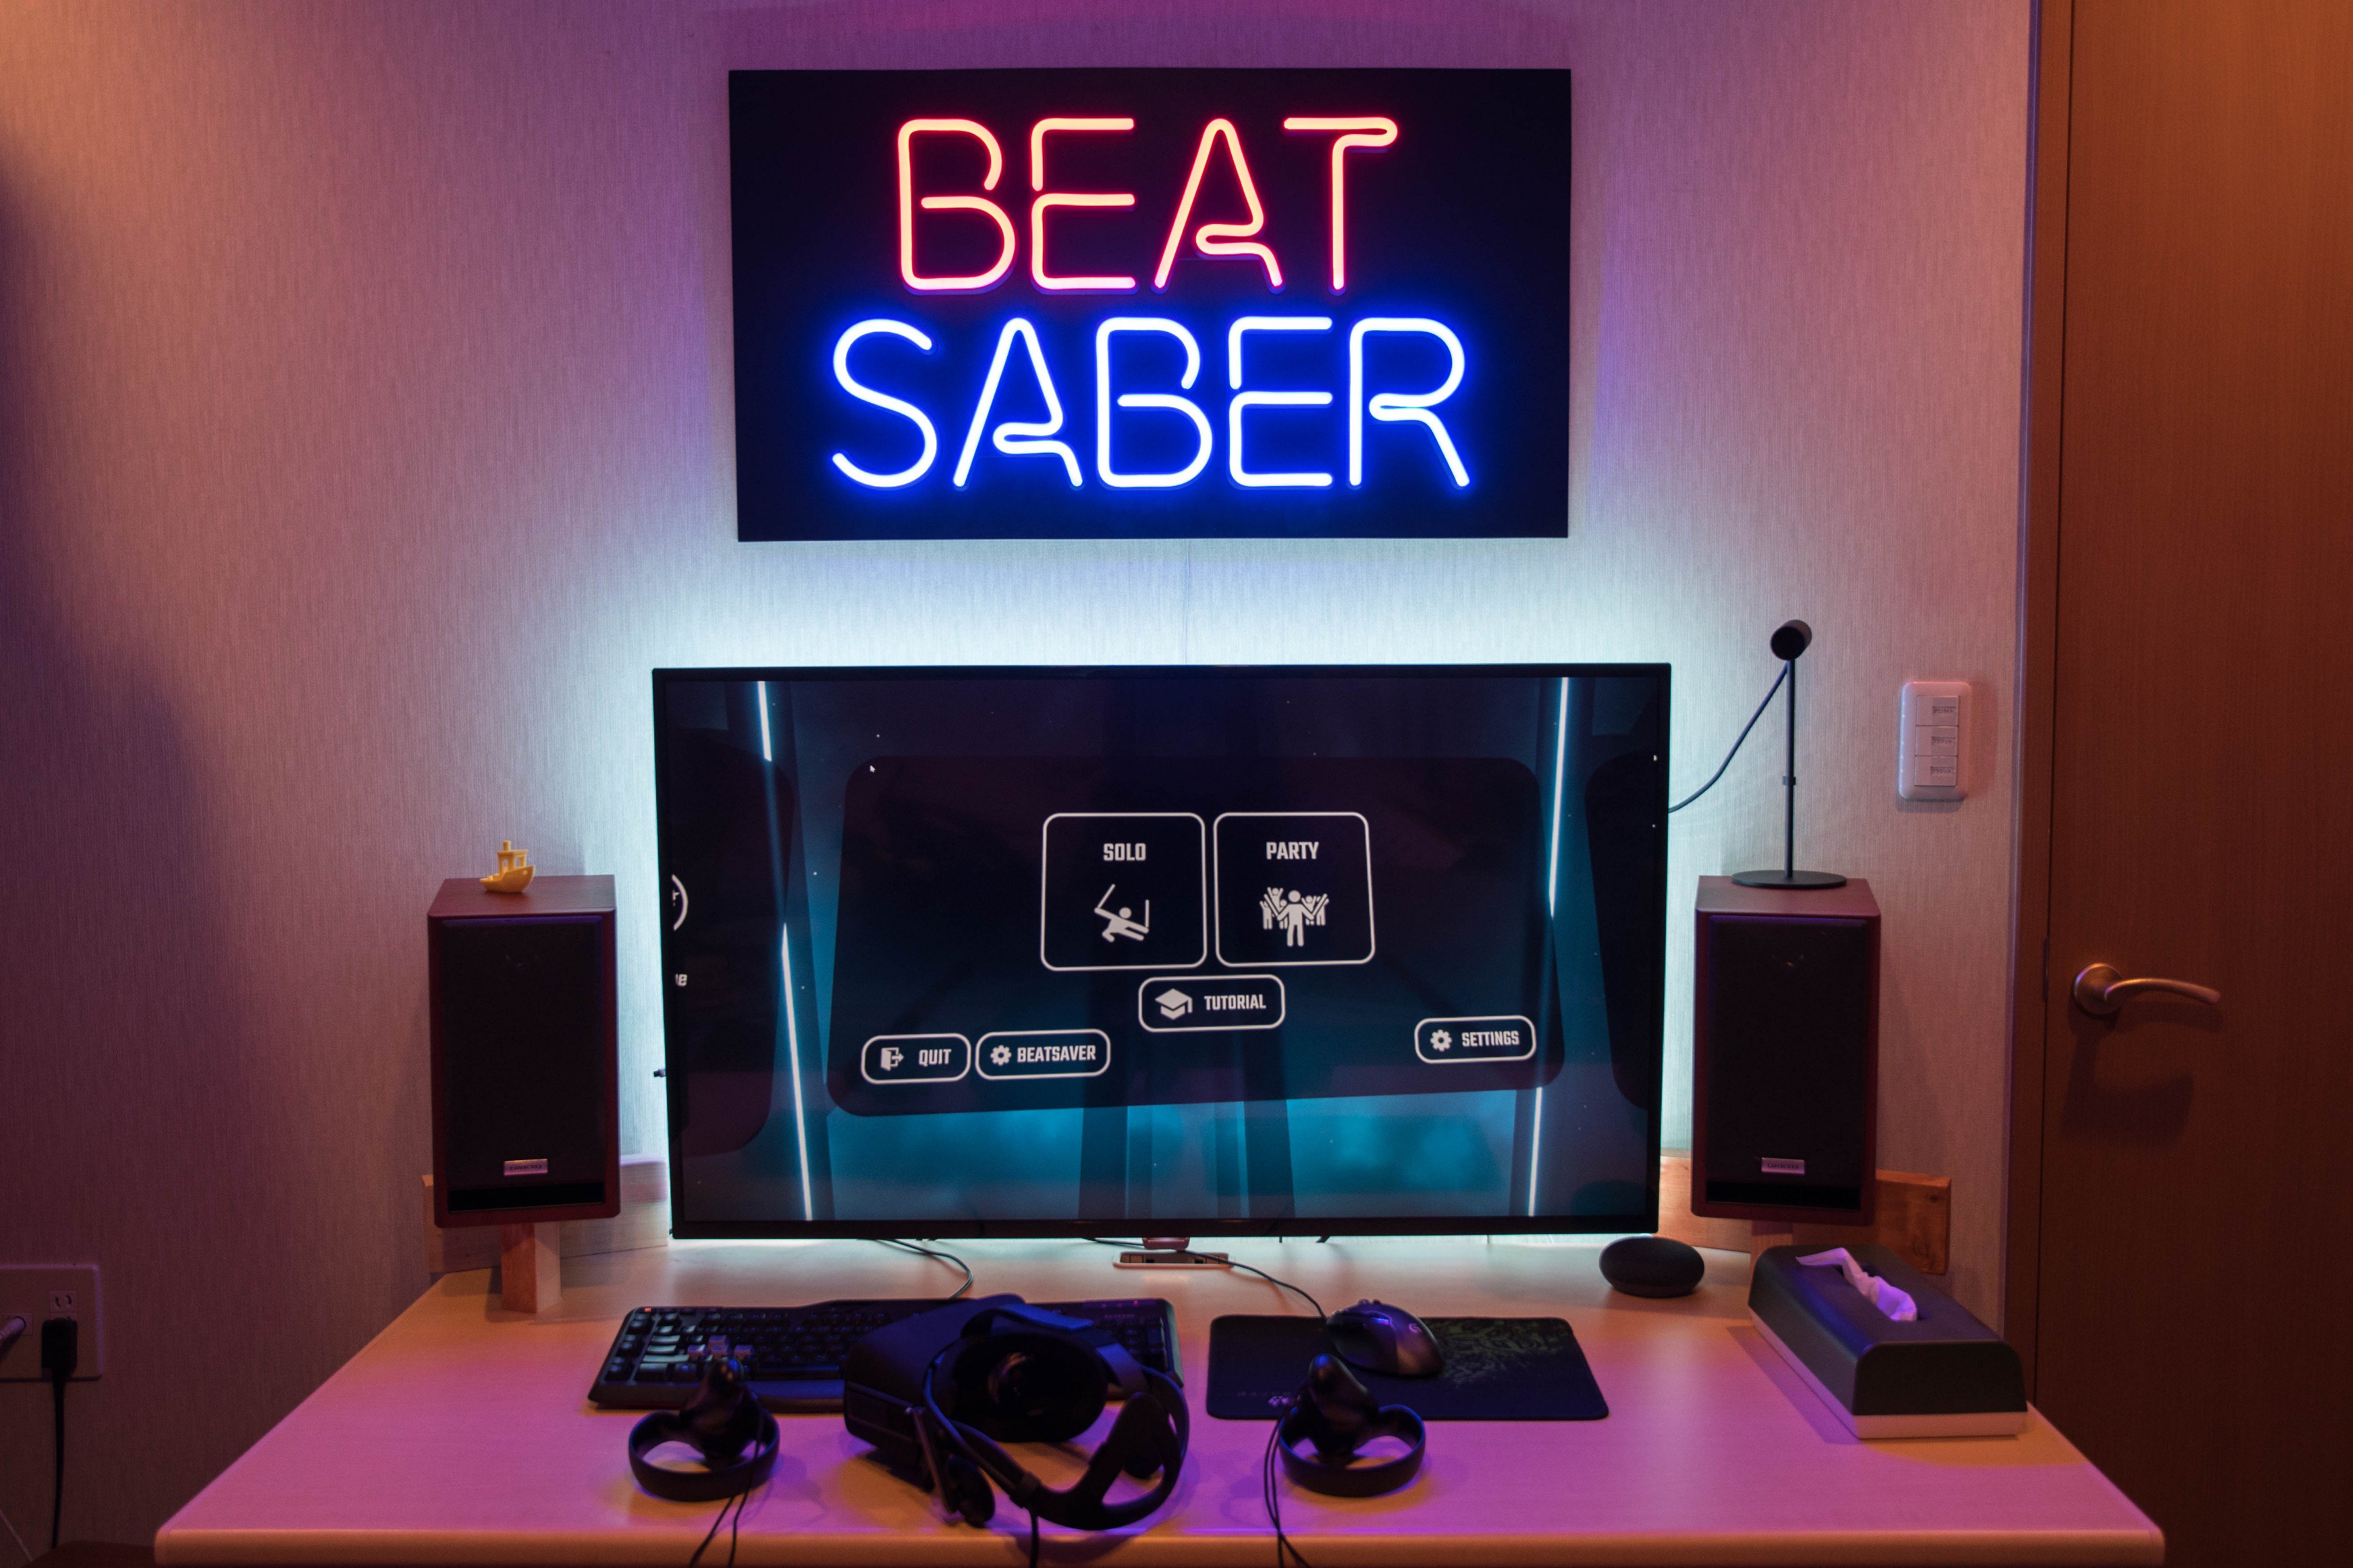 folder Arab Formuler Syou on Twitter: "I fell in love with the game @BeatSaber and its Logo. So  I decided to make the Neon* Sign to hang on my wall! I used 3D printer, LED